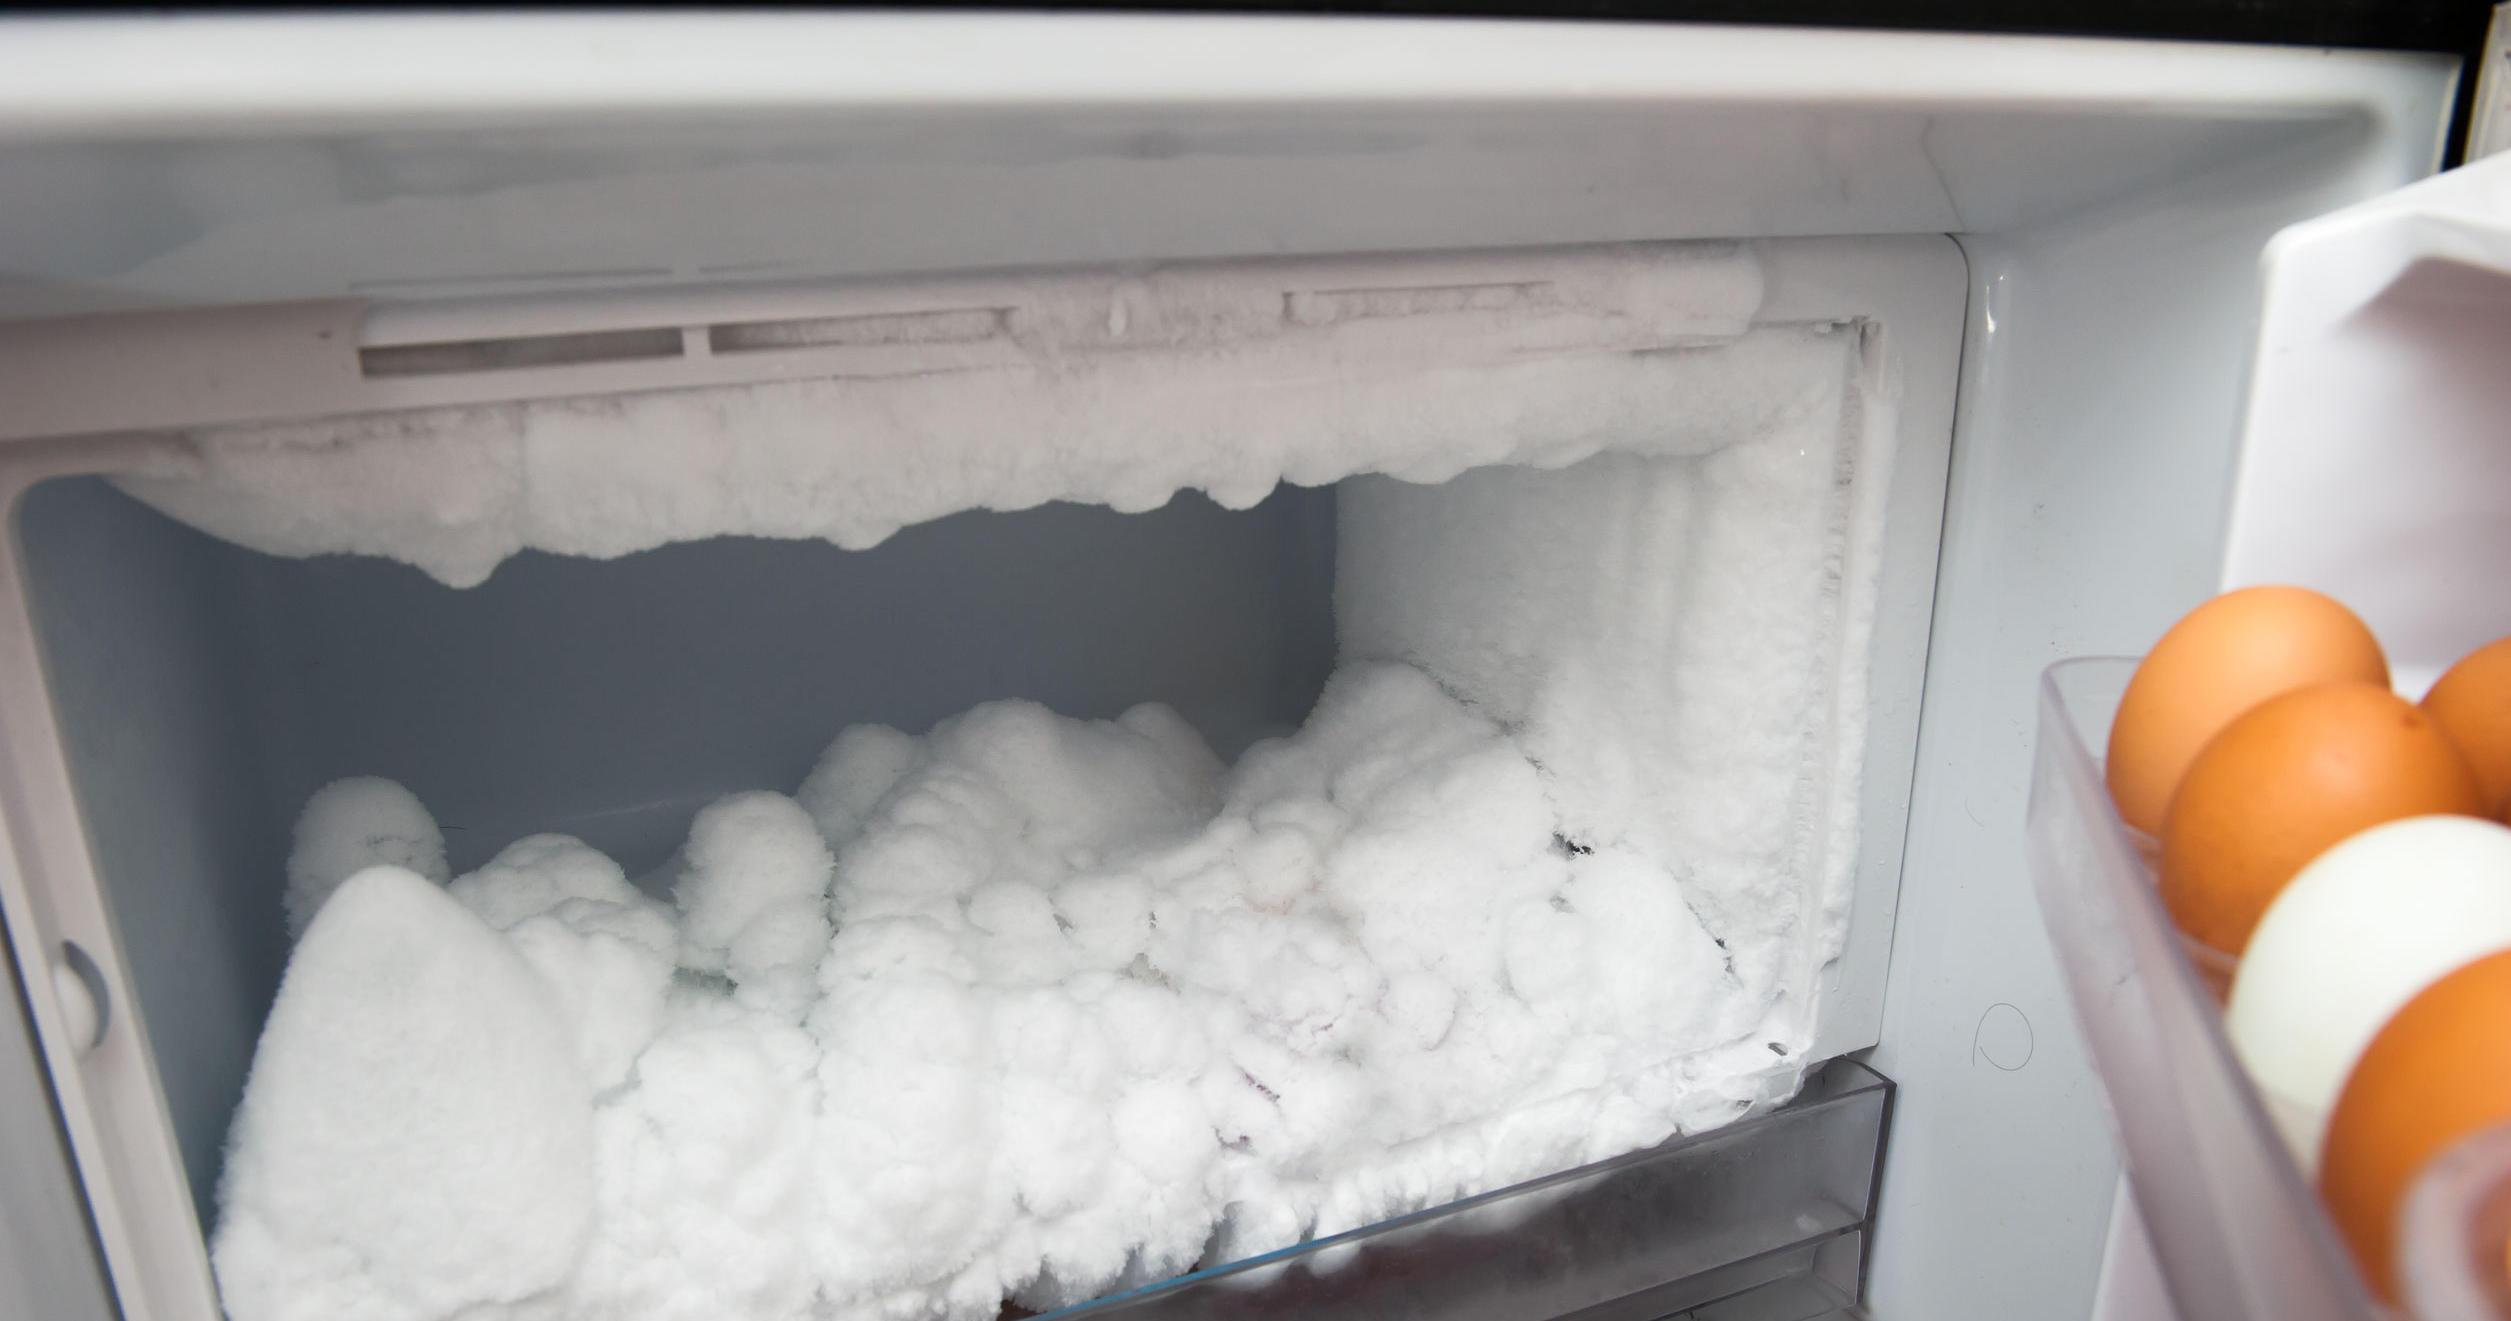 Can I Keep My Fridge/Freezer In The Garage Safely?